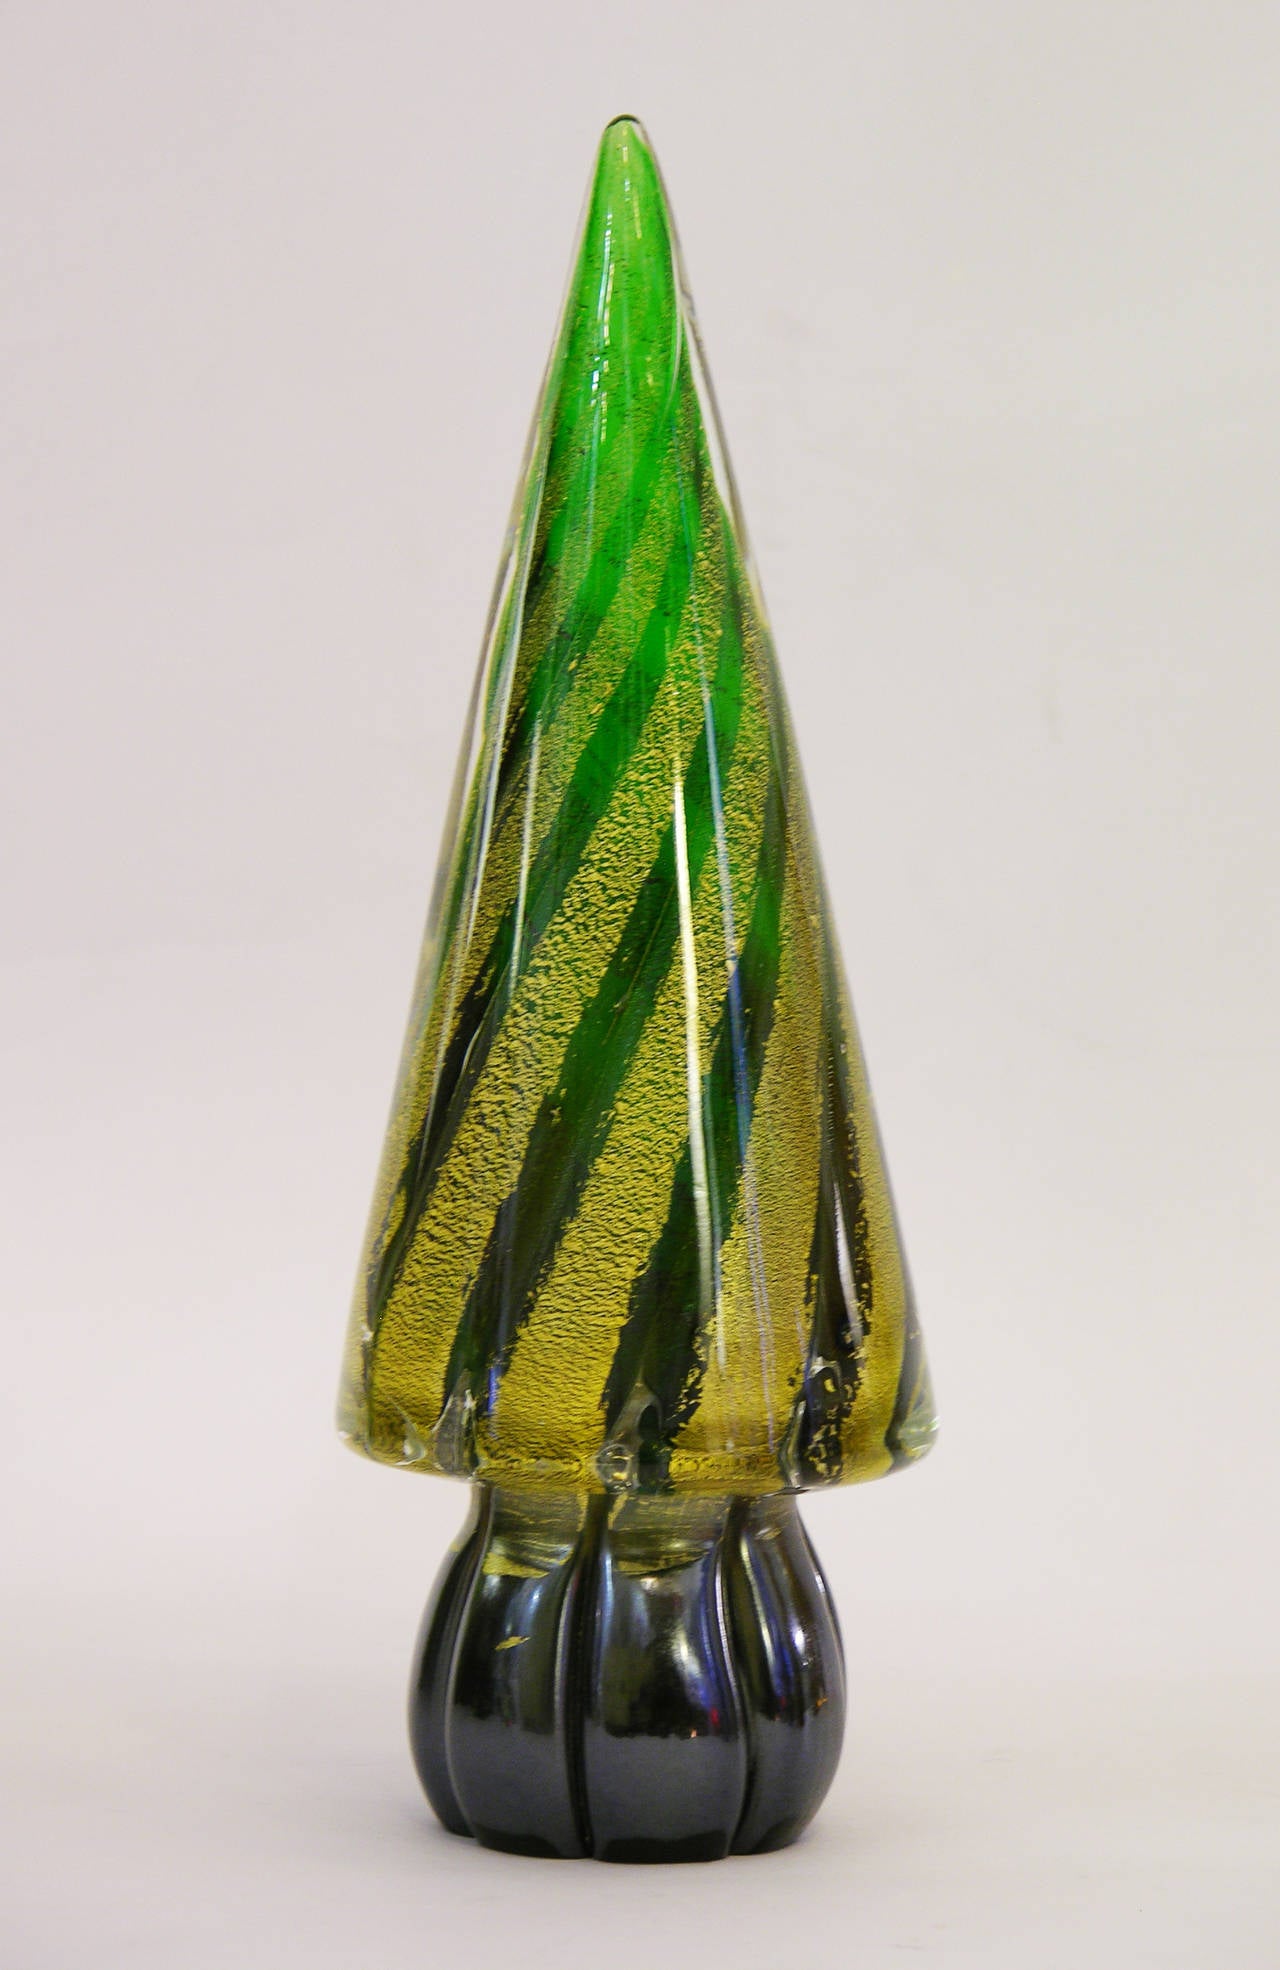 Vintage Italian Murano Glass Christmas Tree Sculptures by Formia 1